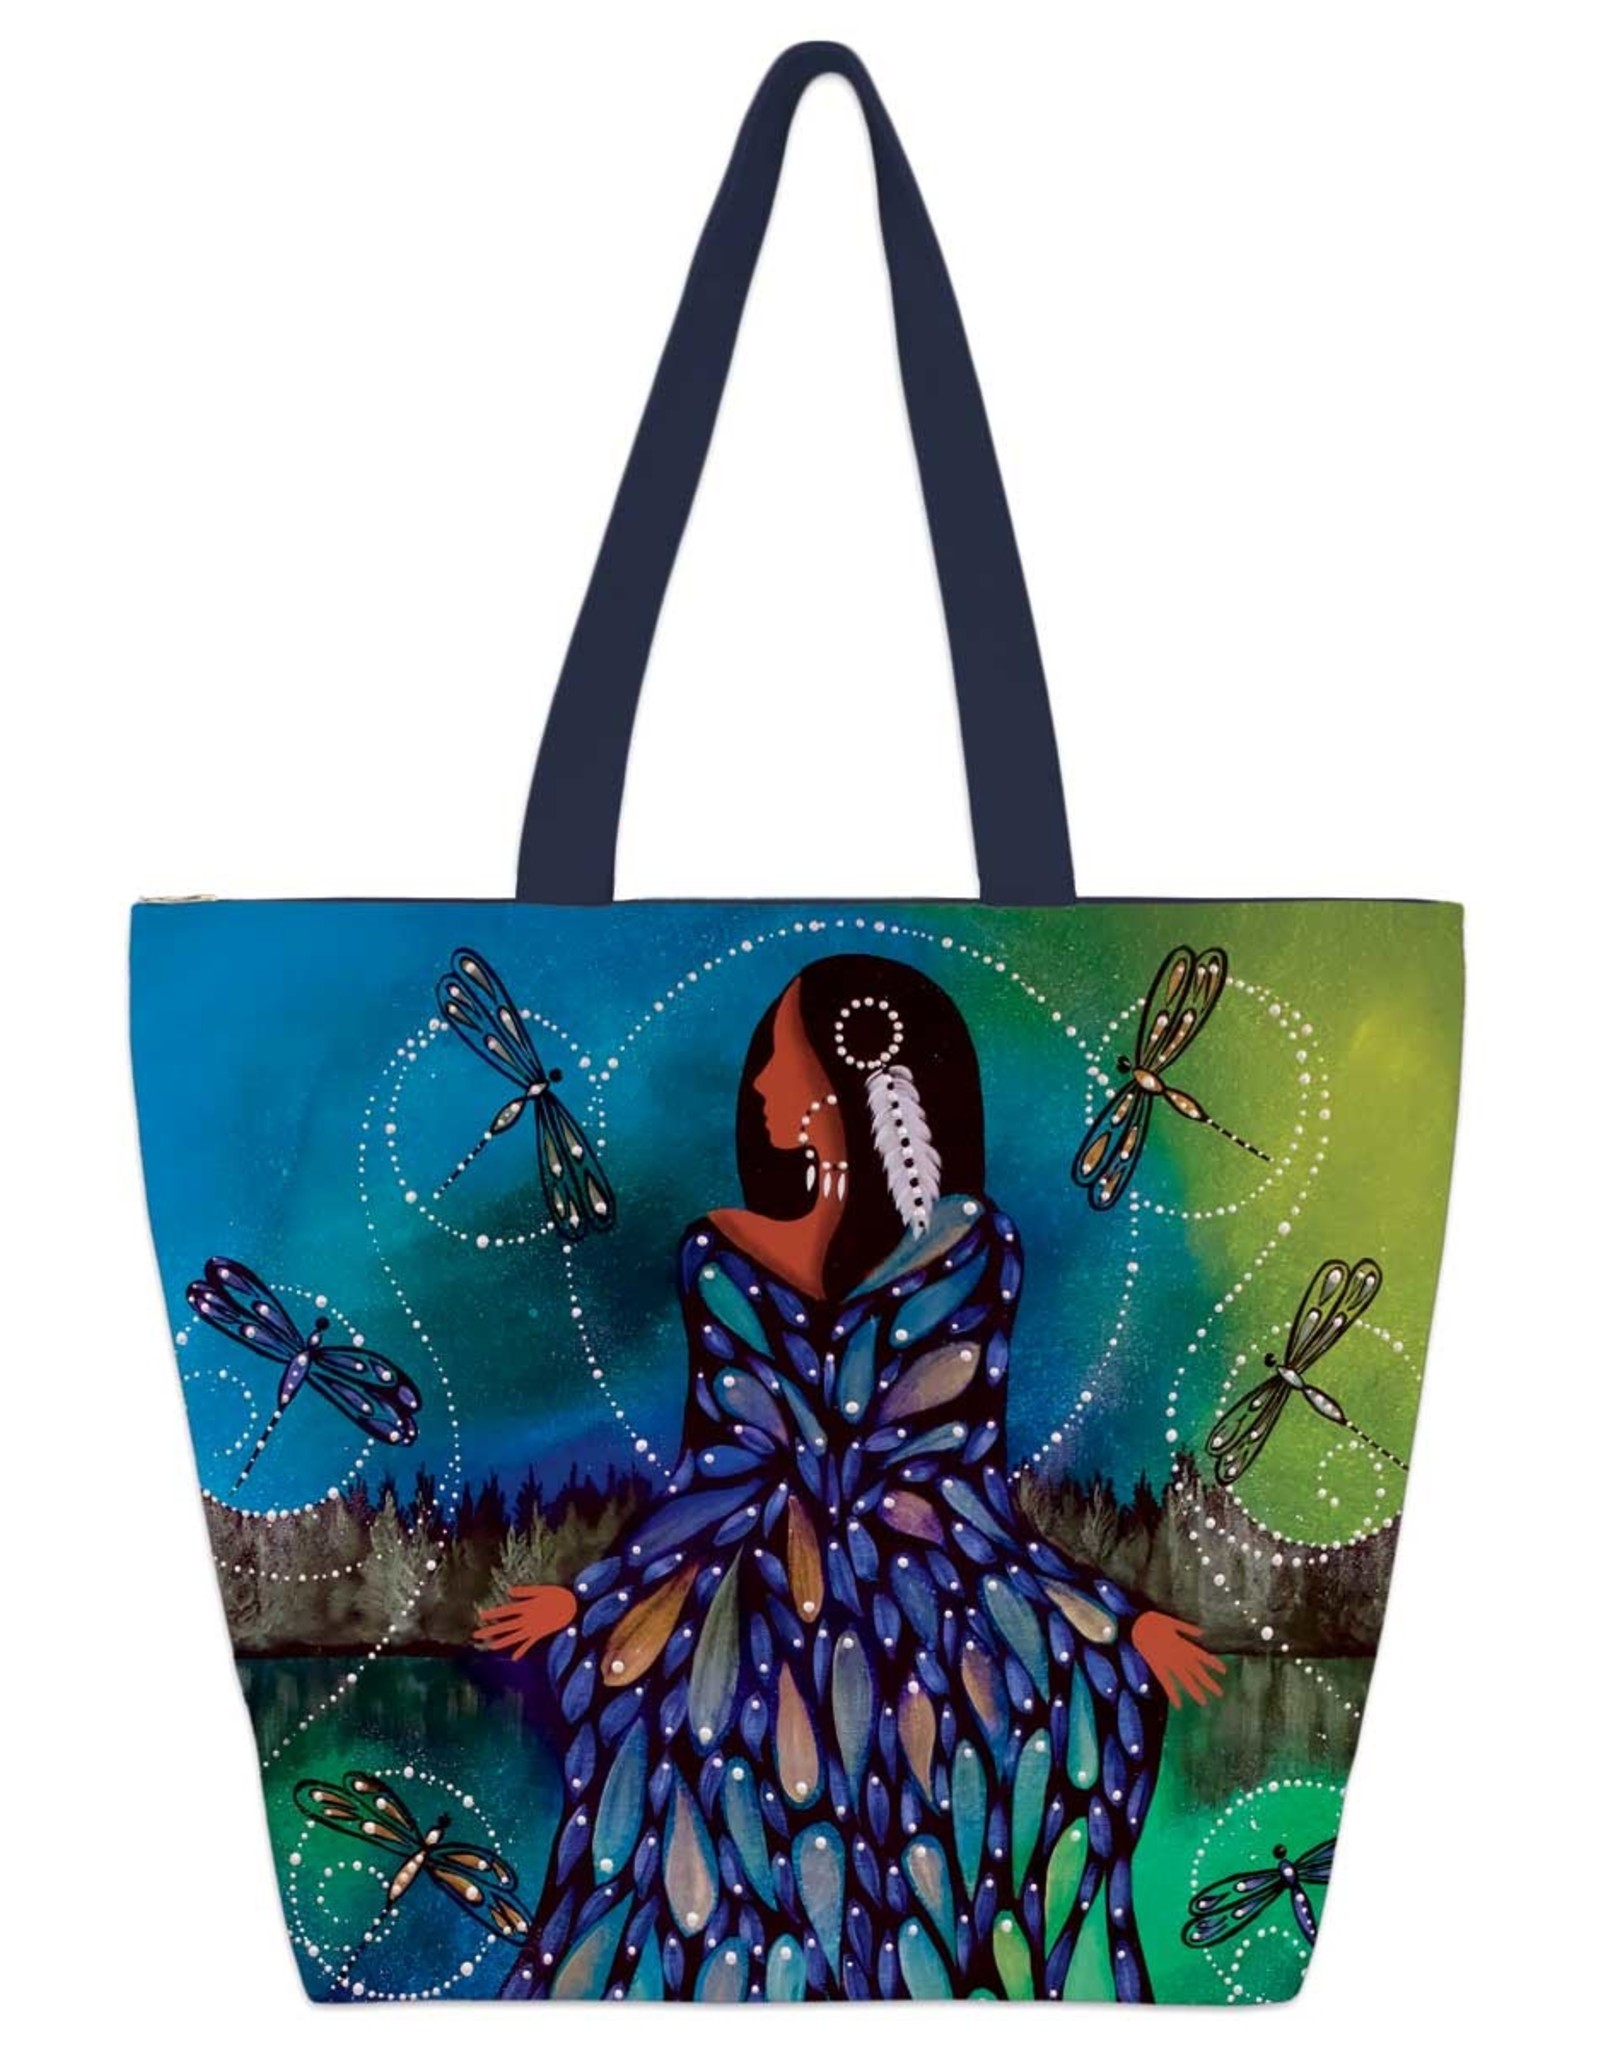 Transformation II by Betty Albert Tote Bag - POD2430TOTE